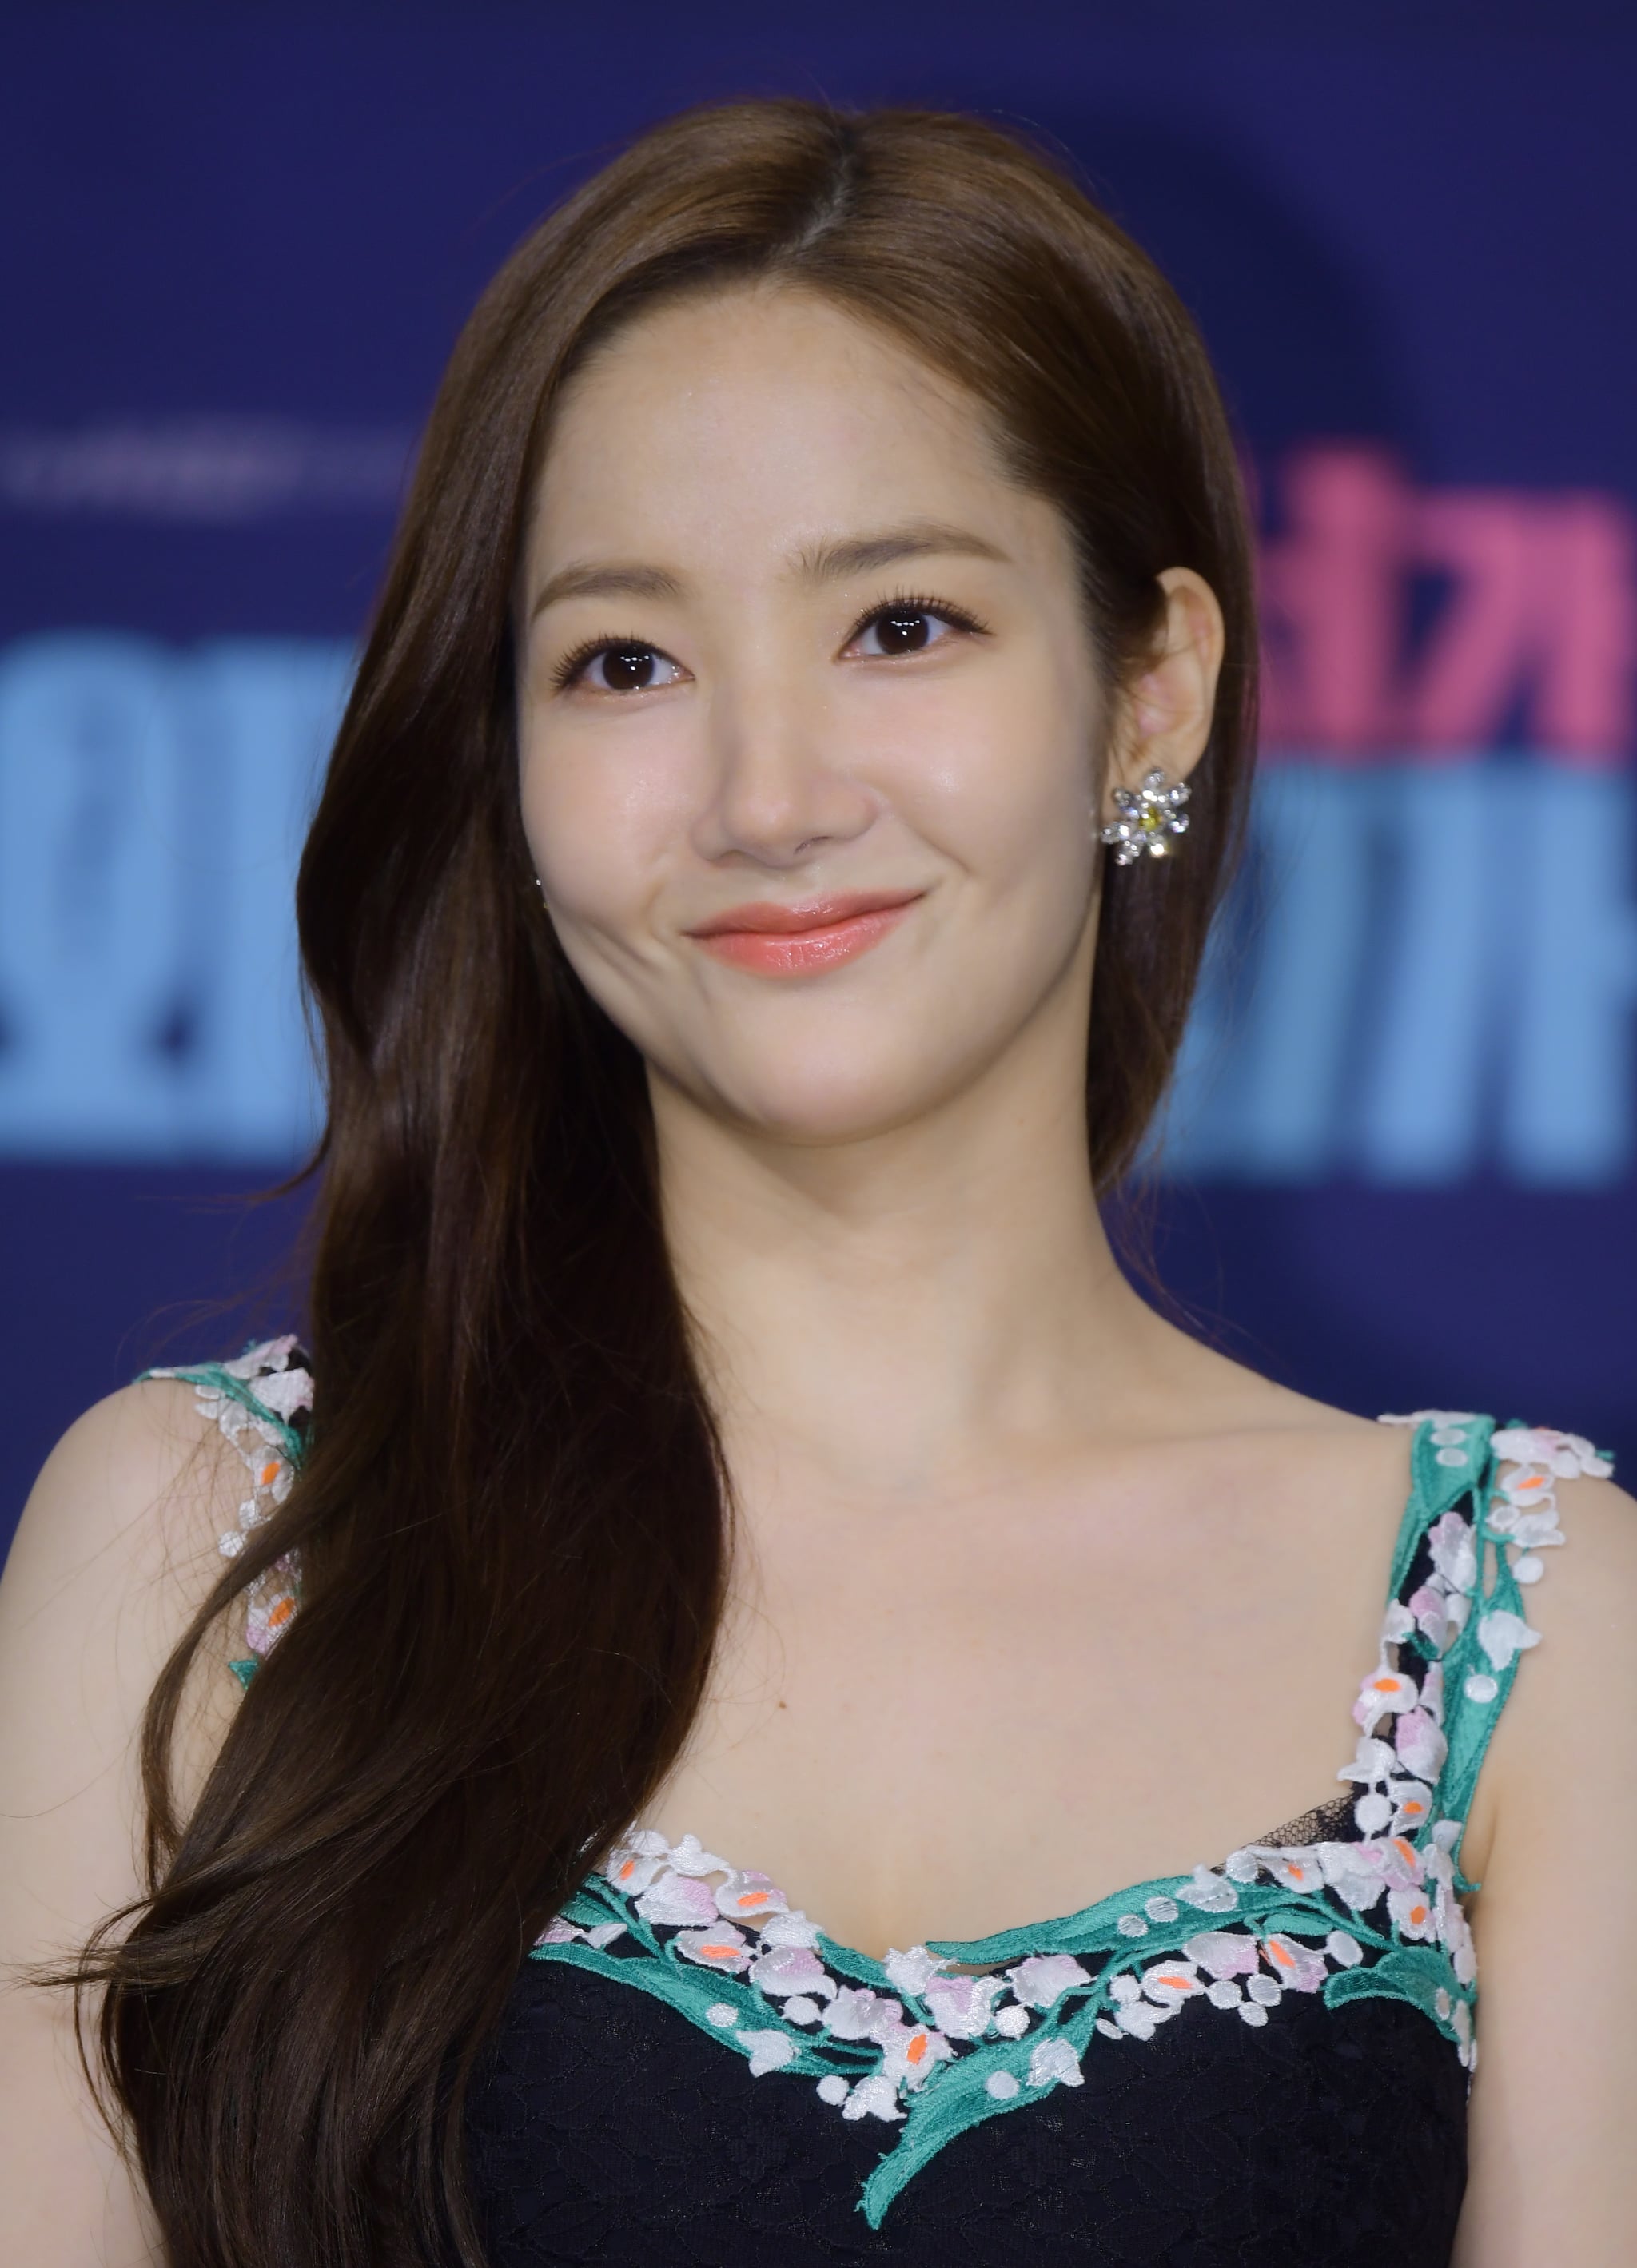 SEOUL, SOUTH KOREA - MAY 30: Actress Park Min-Young during tvN drama 'What's Wrong with Secretary Kim' Press Conference at Amoris Hall on May 30, 2018 in Seoul, South Korea. (Photo by The Chosunilbo JNS/Imazins via Getty Images)